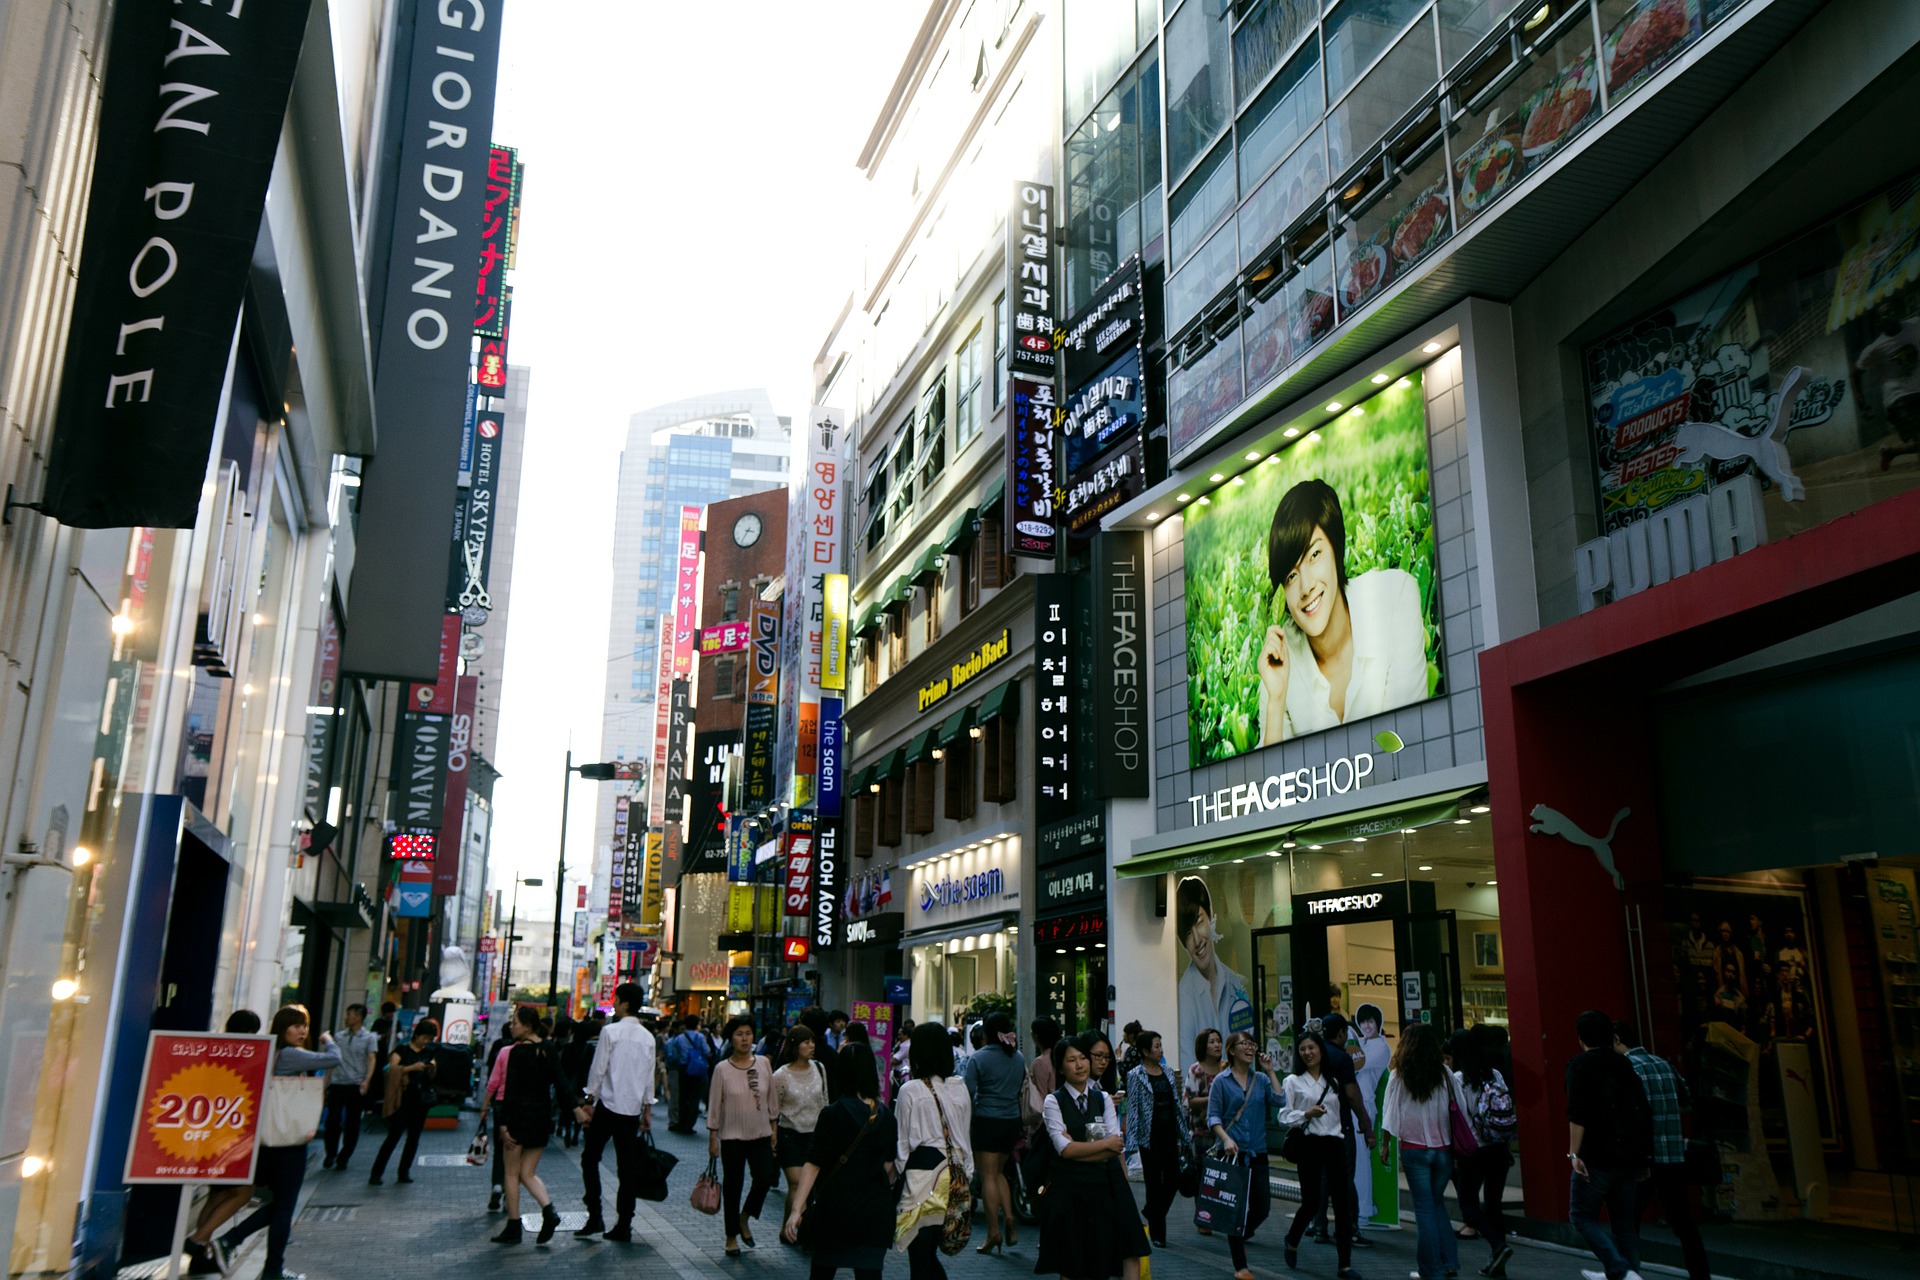 Typical street in Seoul South Korea with neon signs and busy foot traffic 